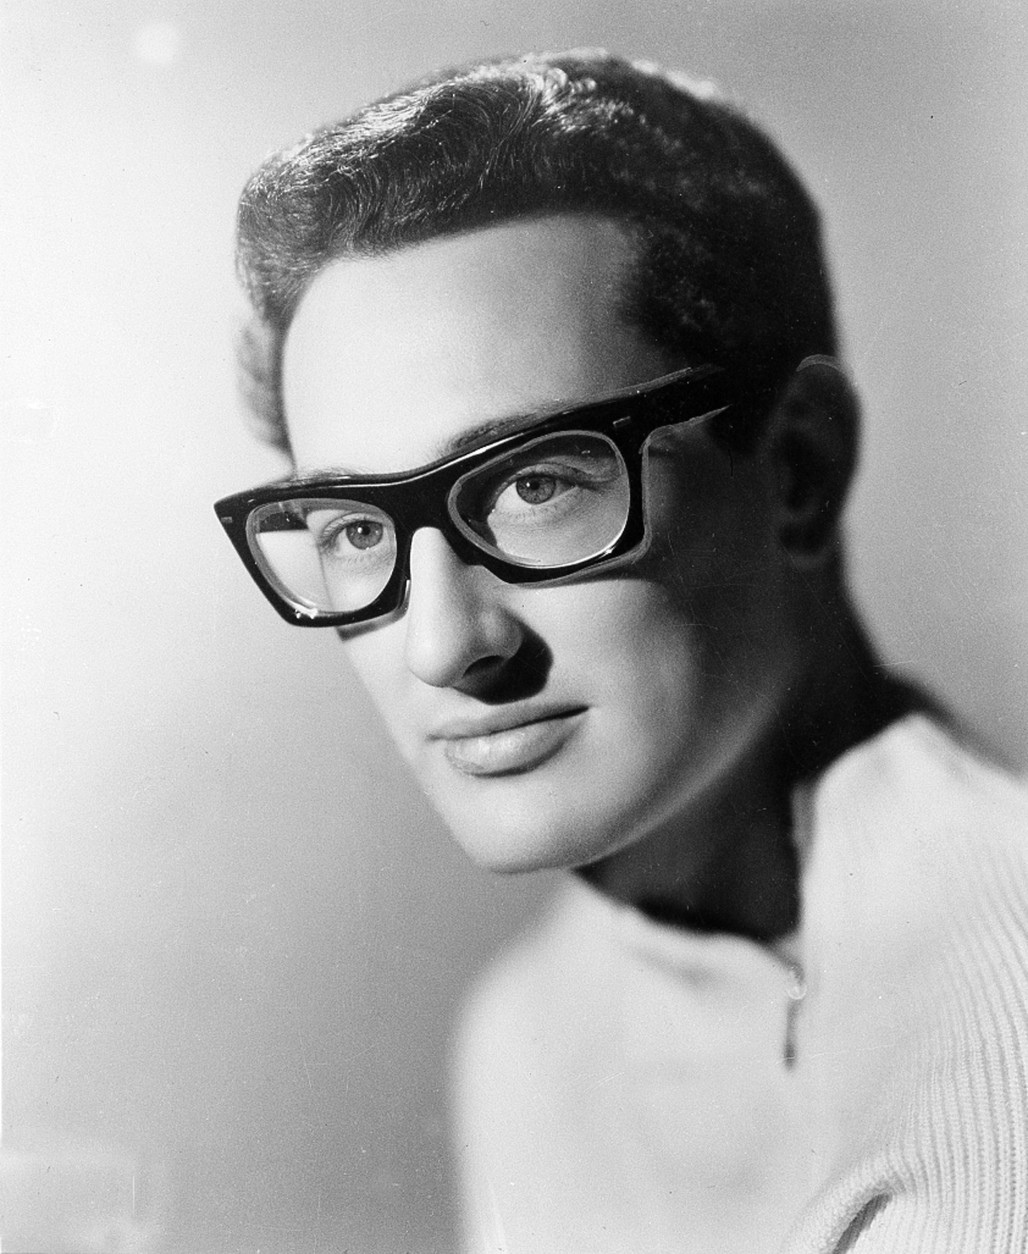 On this date in 1936, rock legend Buddy Holly was born Charles Hardin Holley in Lubbock, Texas. Here, Holly  is shown in 1959 at an unknown location.  (AP Photo)